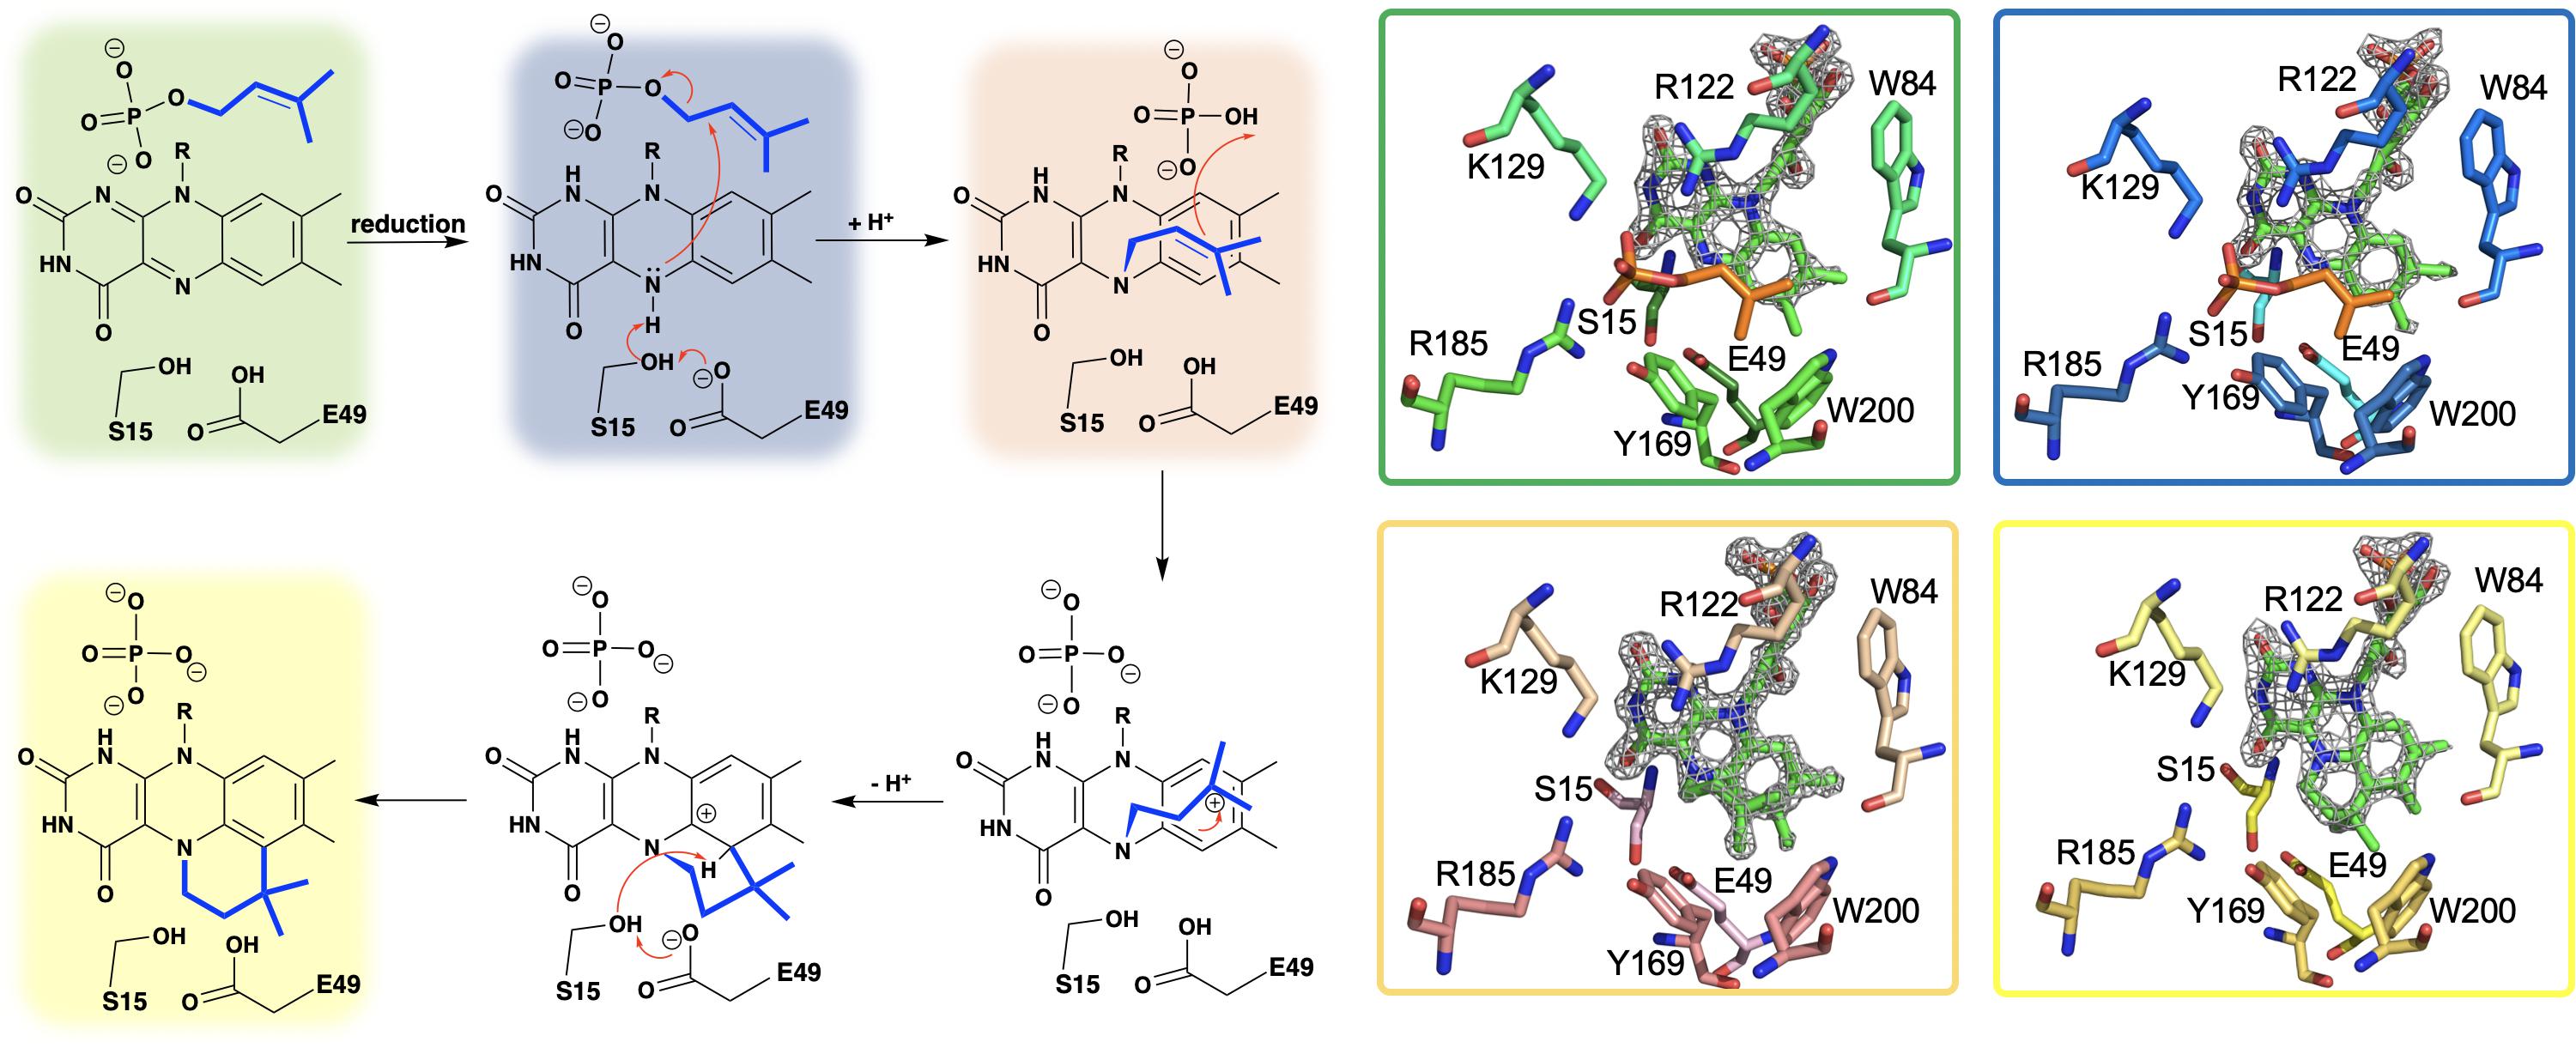 Frontiers N5 Is The New C4a Biochemical Functionalization Of Reduced Flavins At The N5 Position Molecular Biosciences